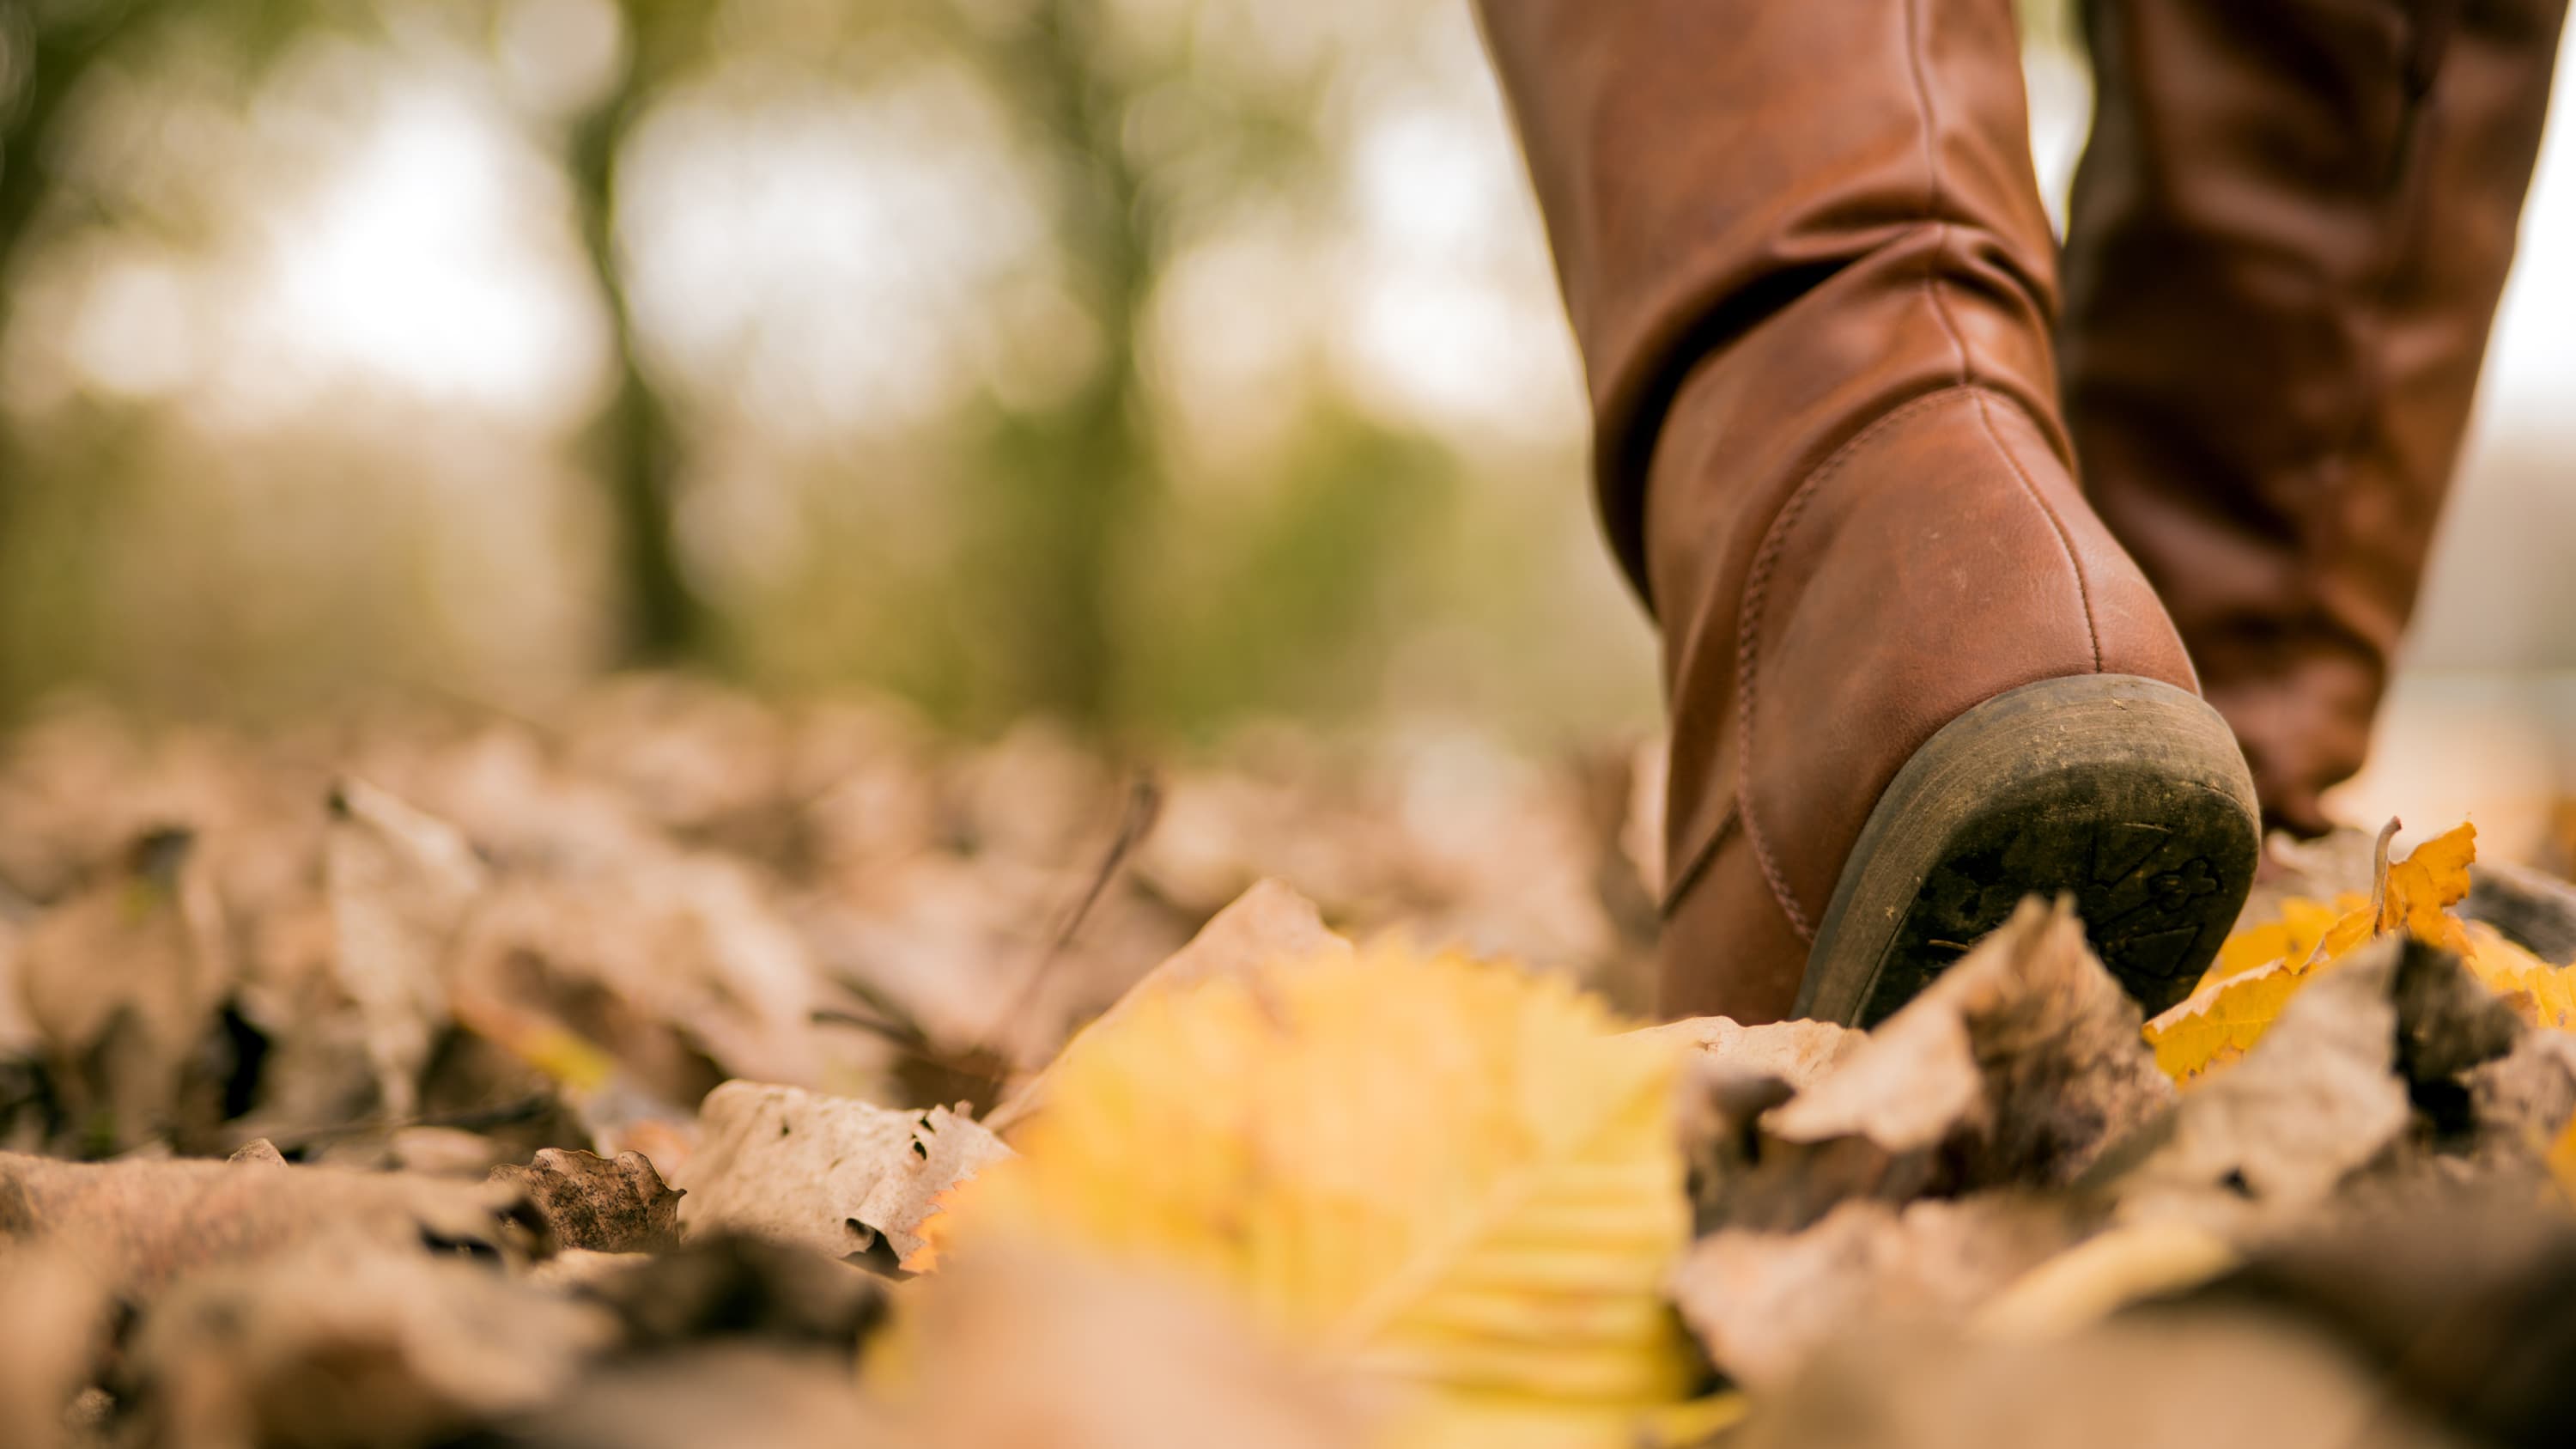 A woman's brown boot in leaves where it's possible to pick up a tick that may carry Lyme disease.